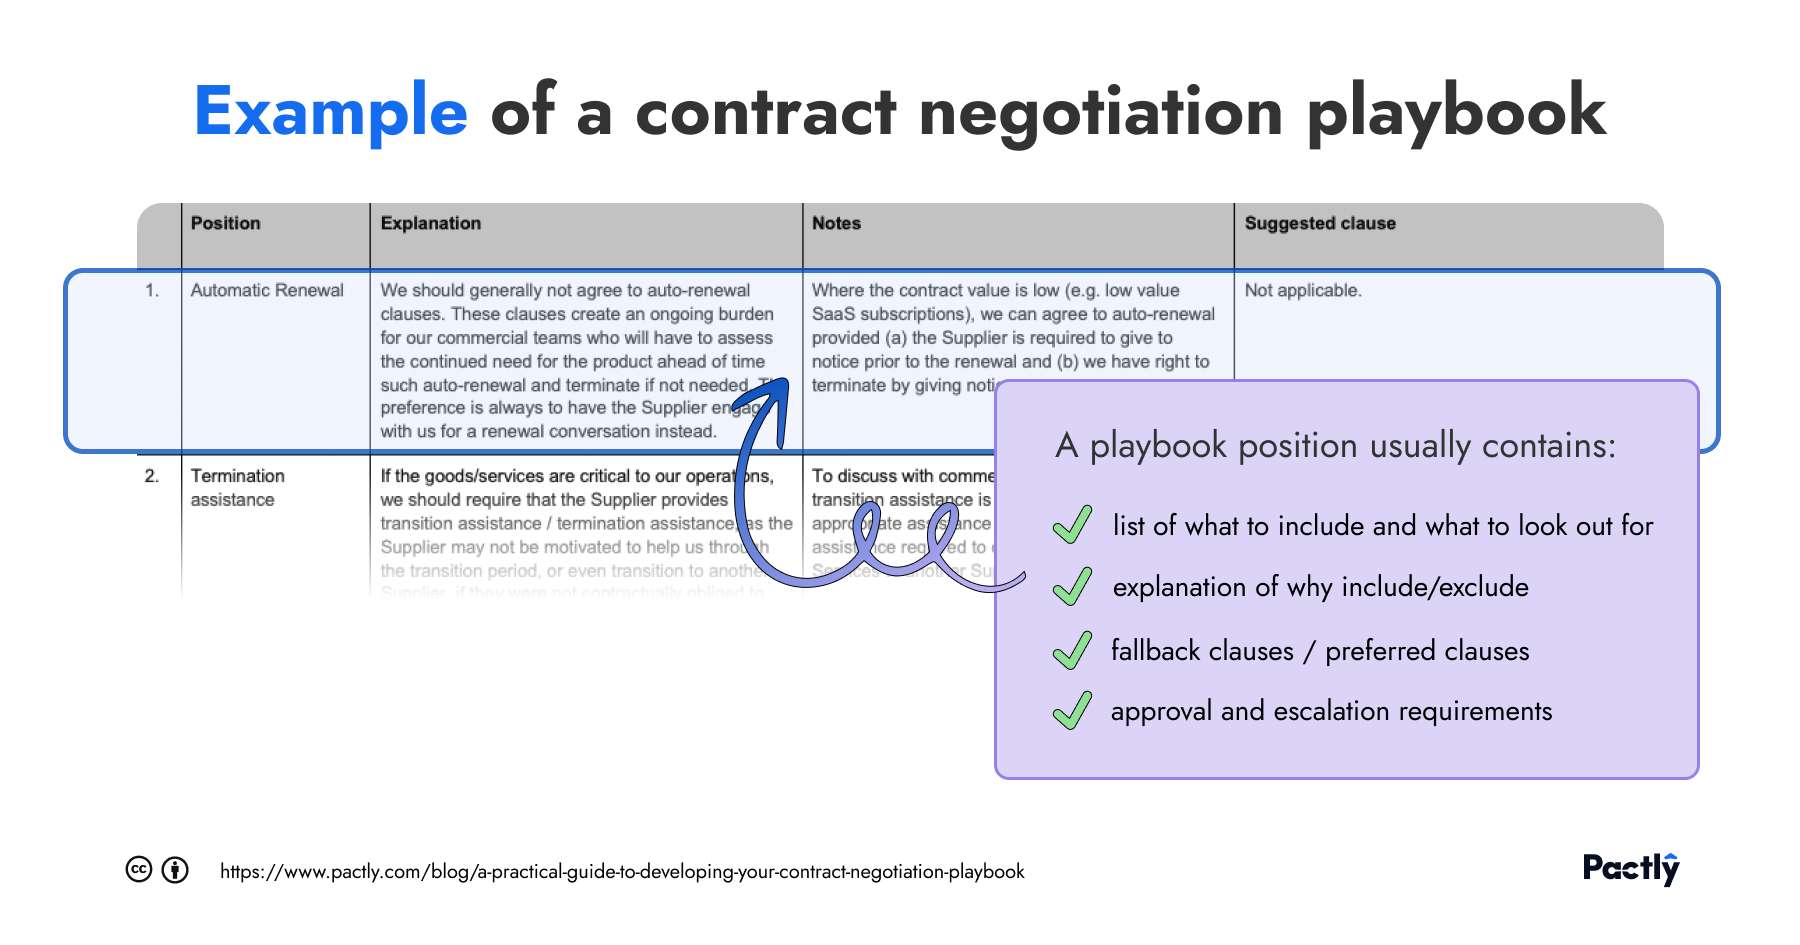 A practical guide to developing a contract negotiation playbook